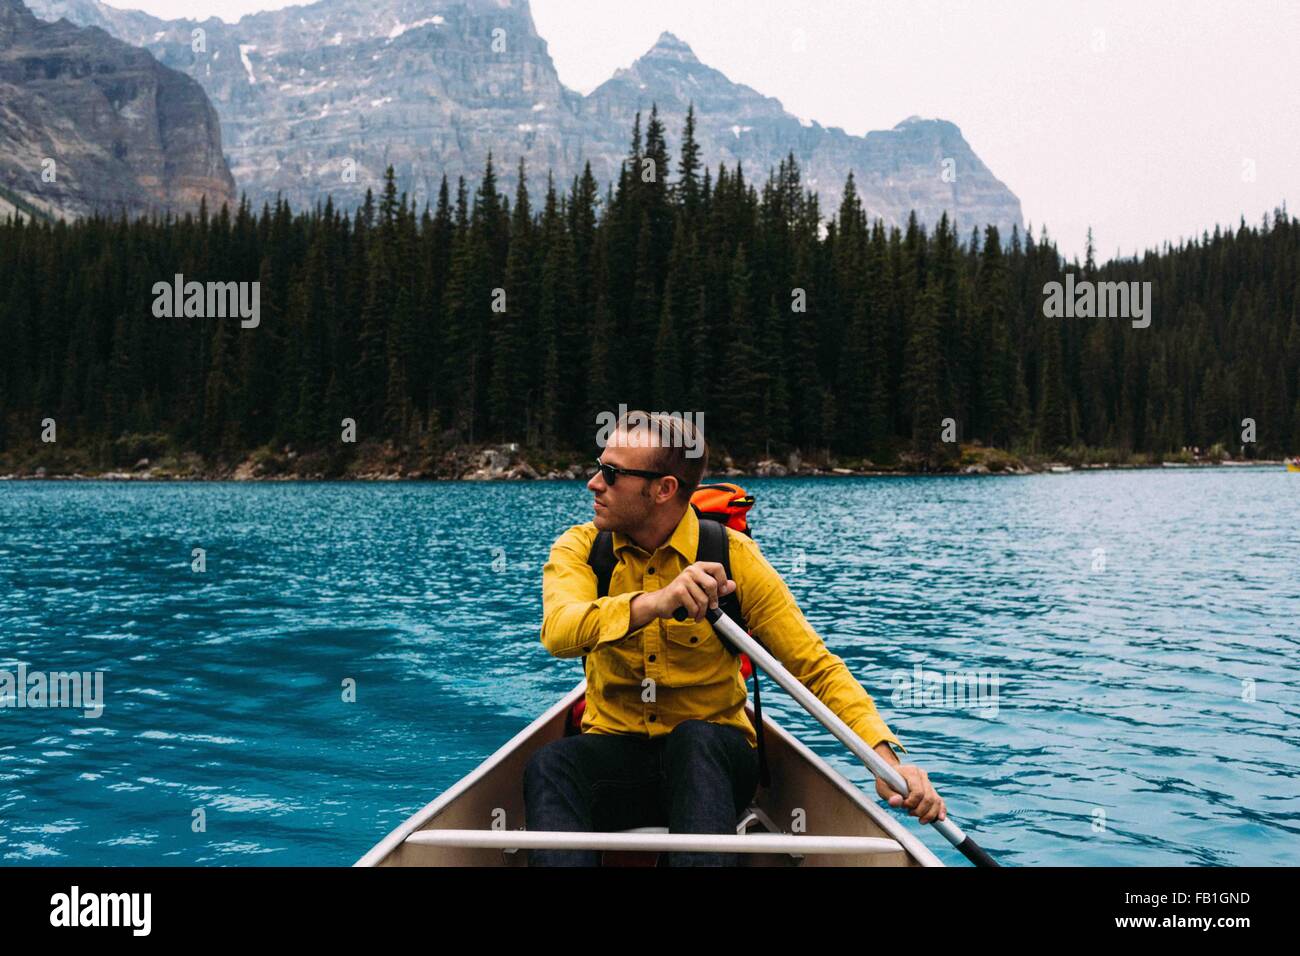 Front view of mid adult man paddling canoe, looking away, Moraine lake, Banff National Park, Alberta Canada Stock Photo